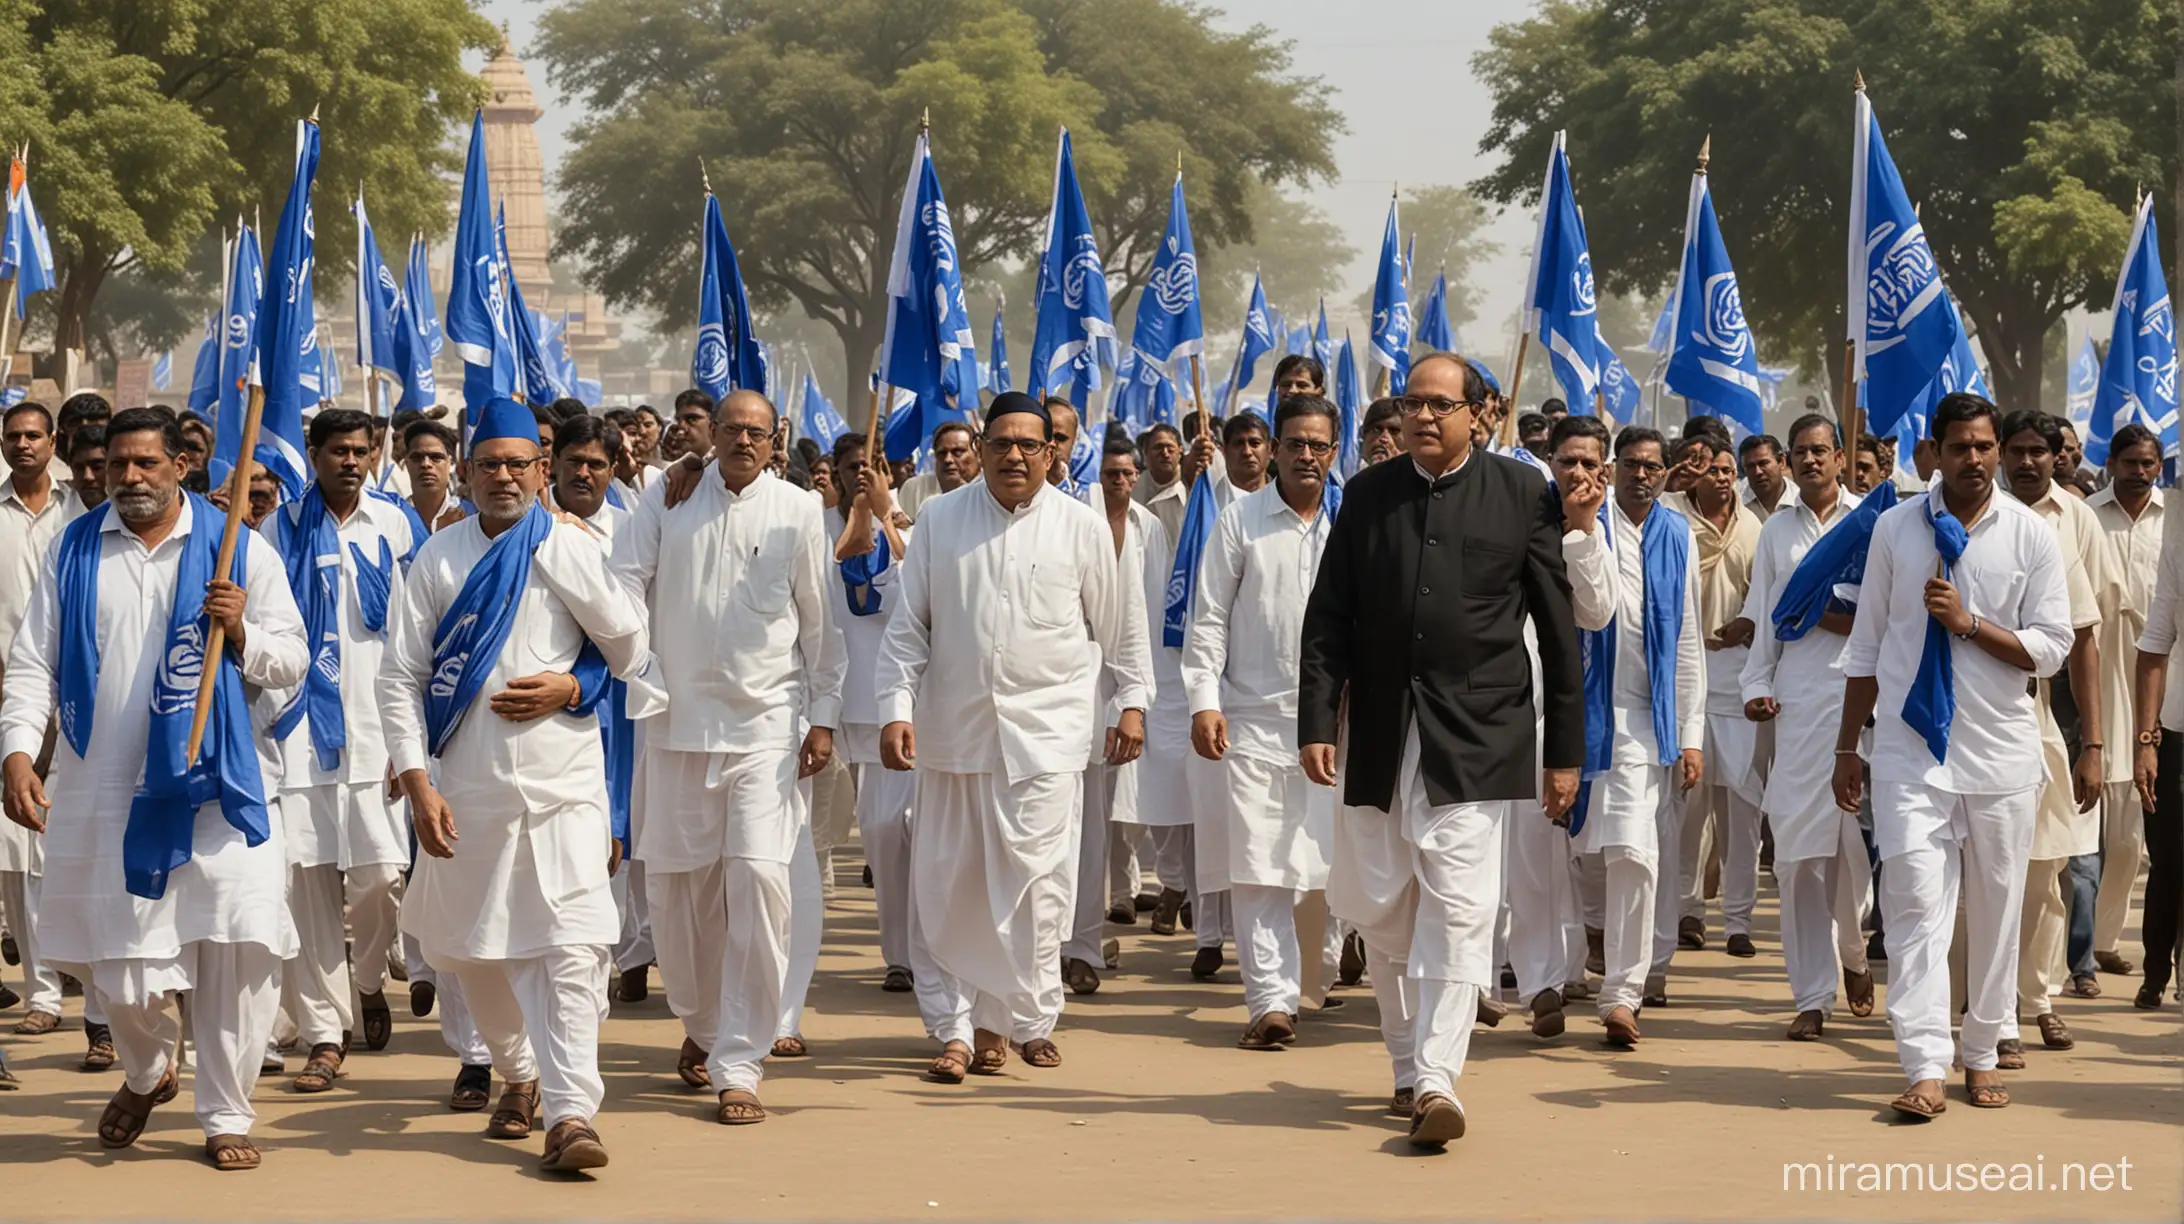 Dr.Babasaheb Bhimrao Ambedkar walking steps dhoti black coat shirt along with many indian dalit people holding Blue flags in their hands while protesting background temple sky